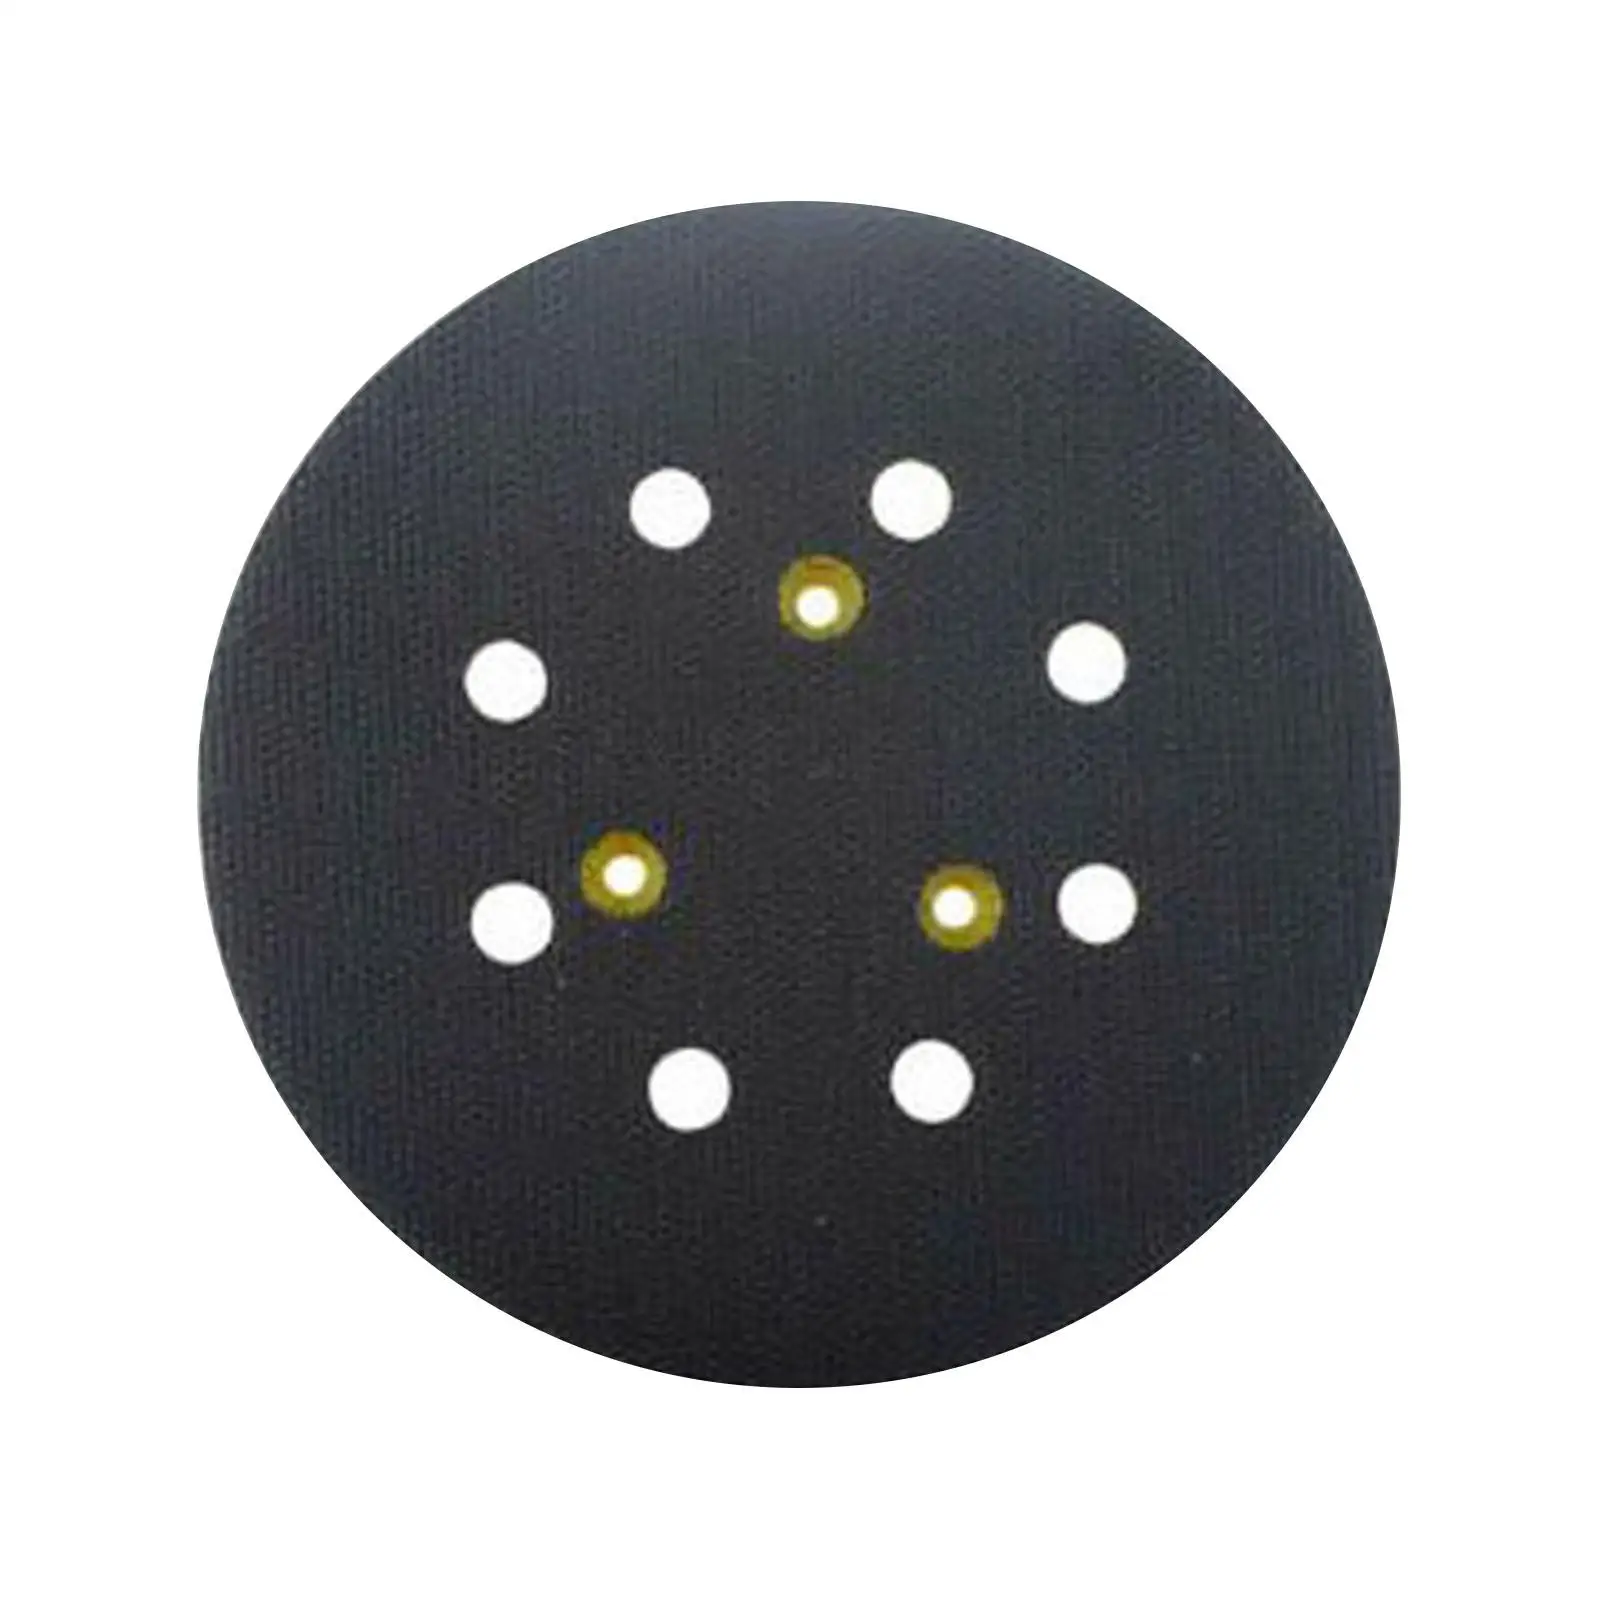 8 Holes Grinding  Replacement Durable Sanding Disc Pad for Polisher